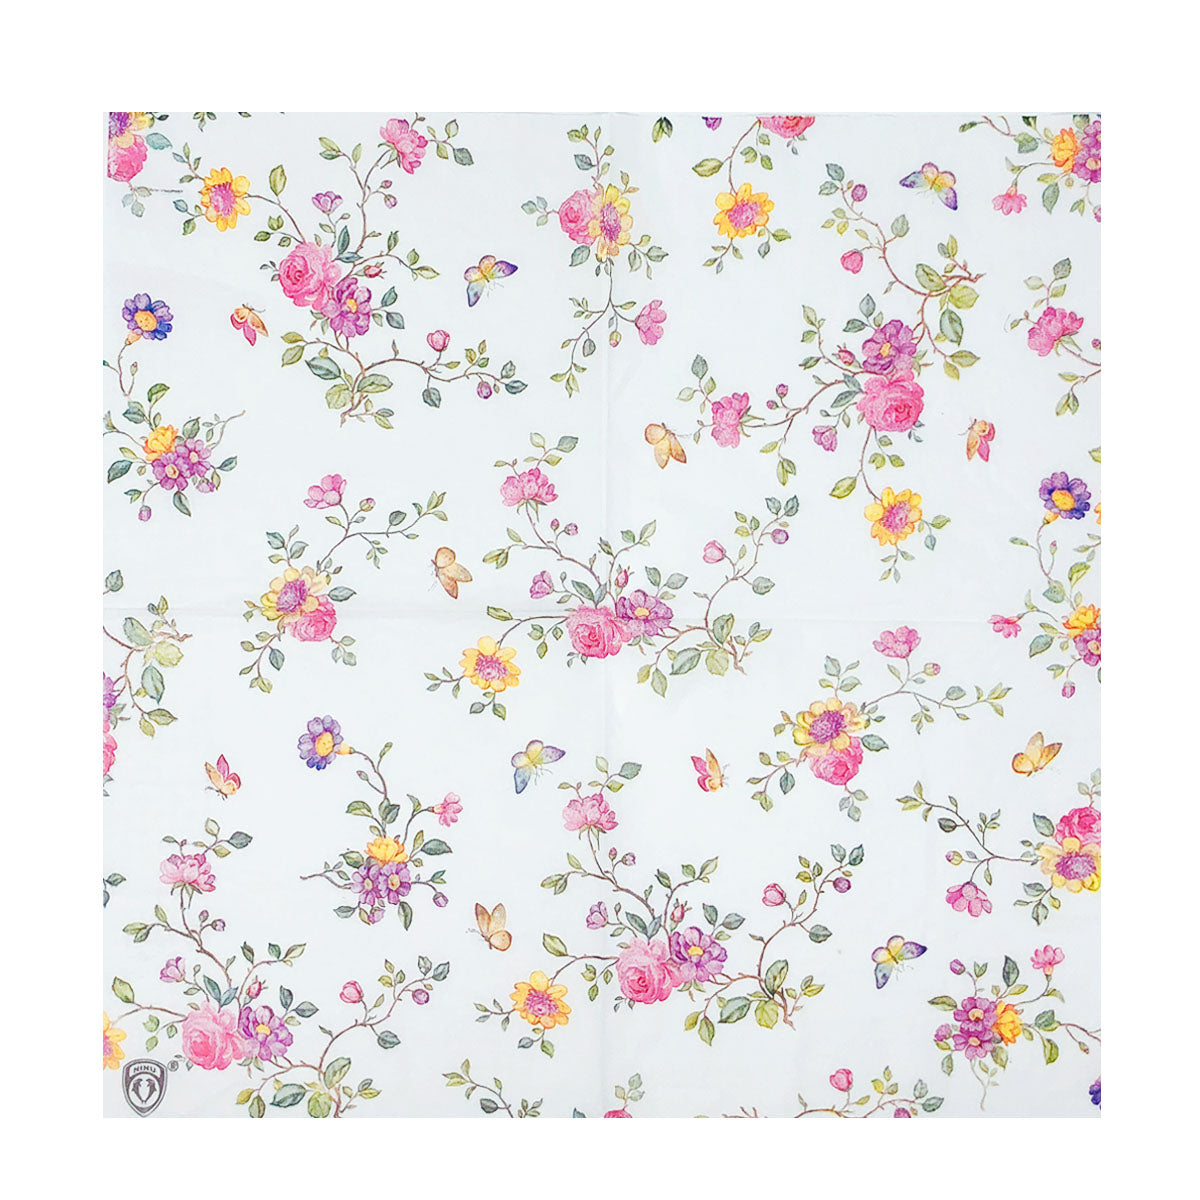 Wrapables Floral 2 Ply Paper Napkins (40 Count) for Wedding, Dinner Party, Tea Party, Decorative Decoupage Butterflies Pink